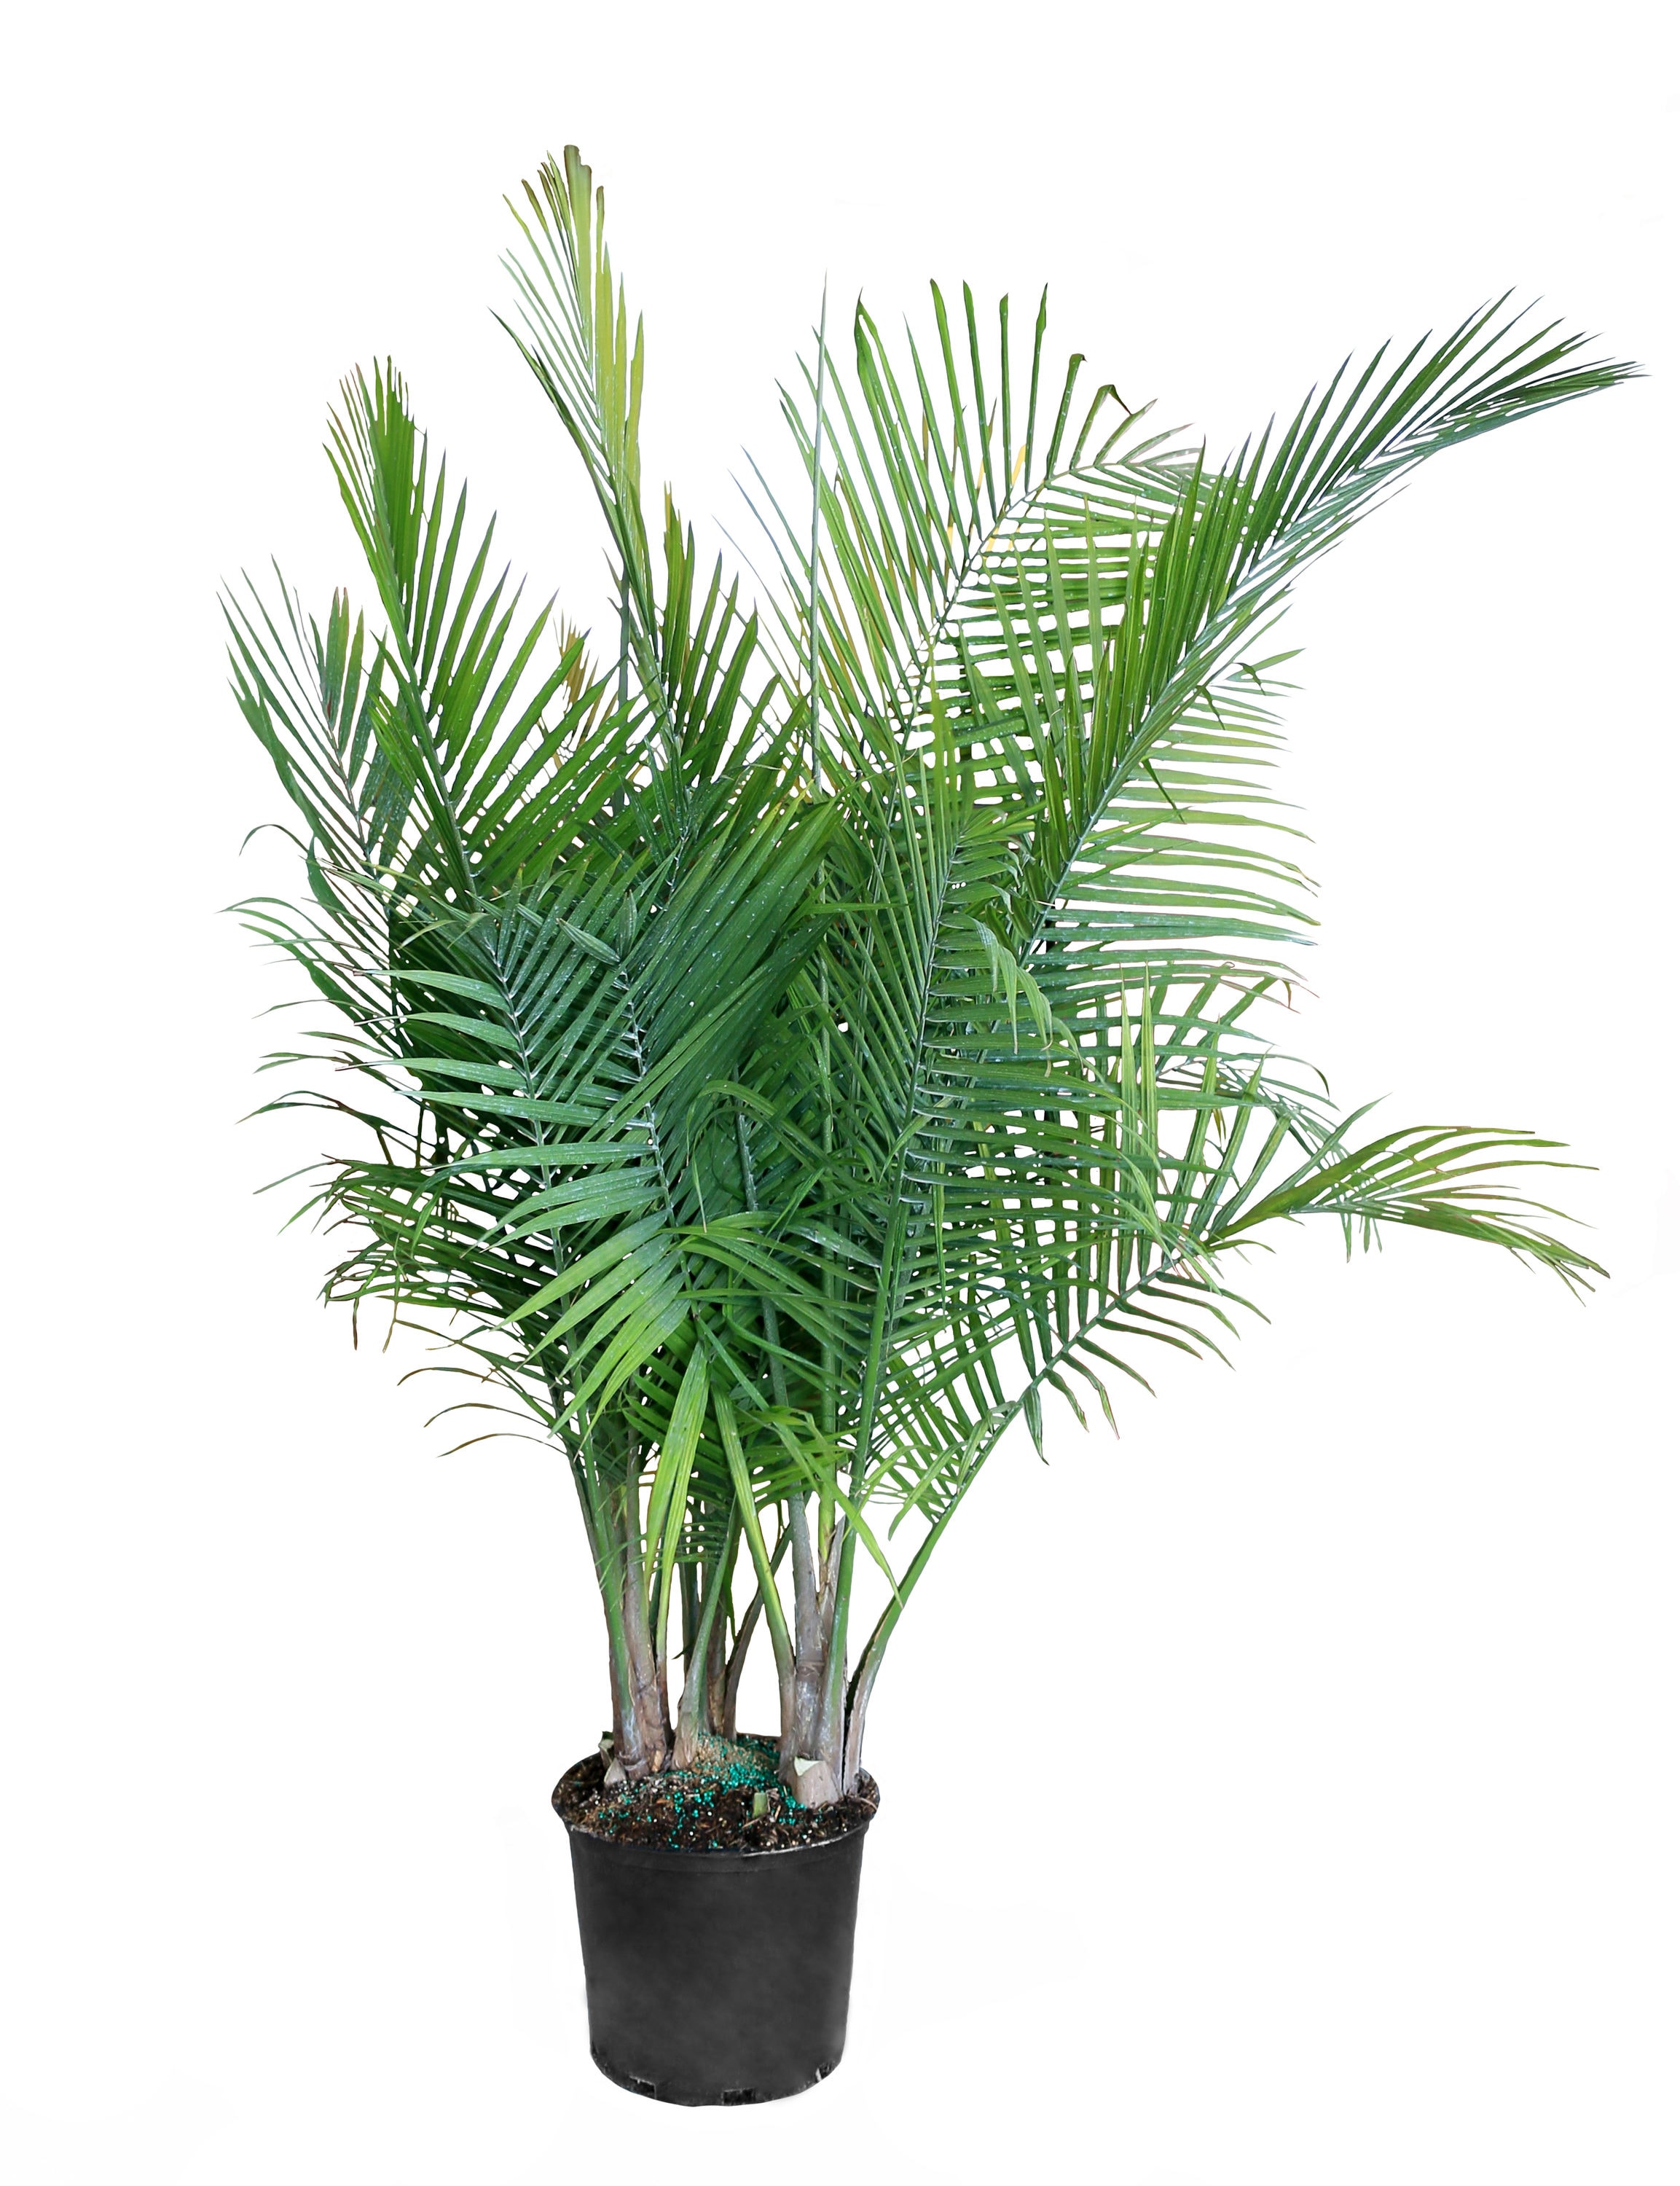 Costa Farms Majesty Palm House Plant in 12-in Pot in the House Plants ...